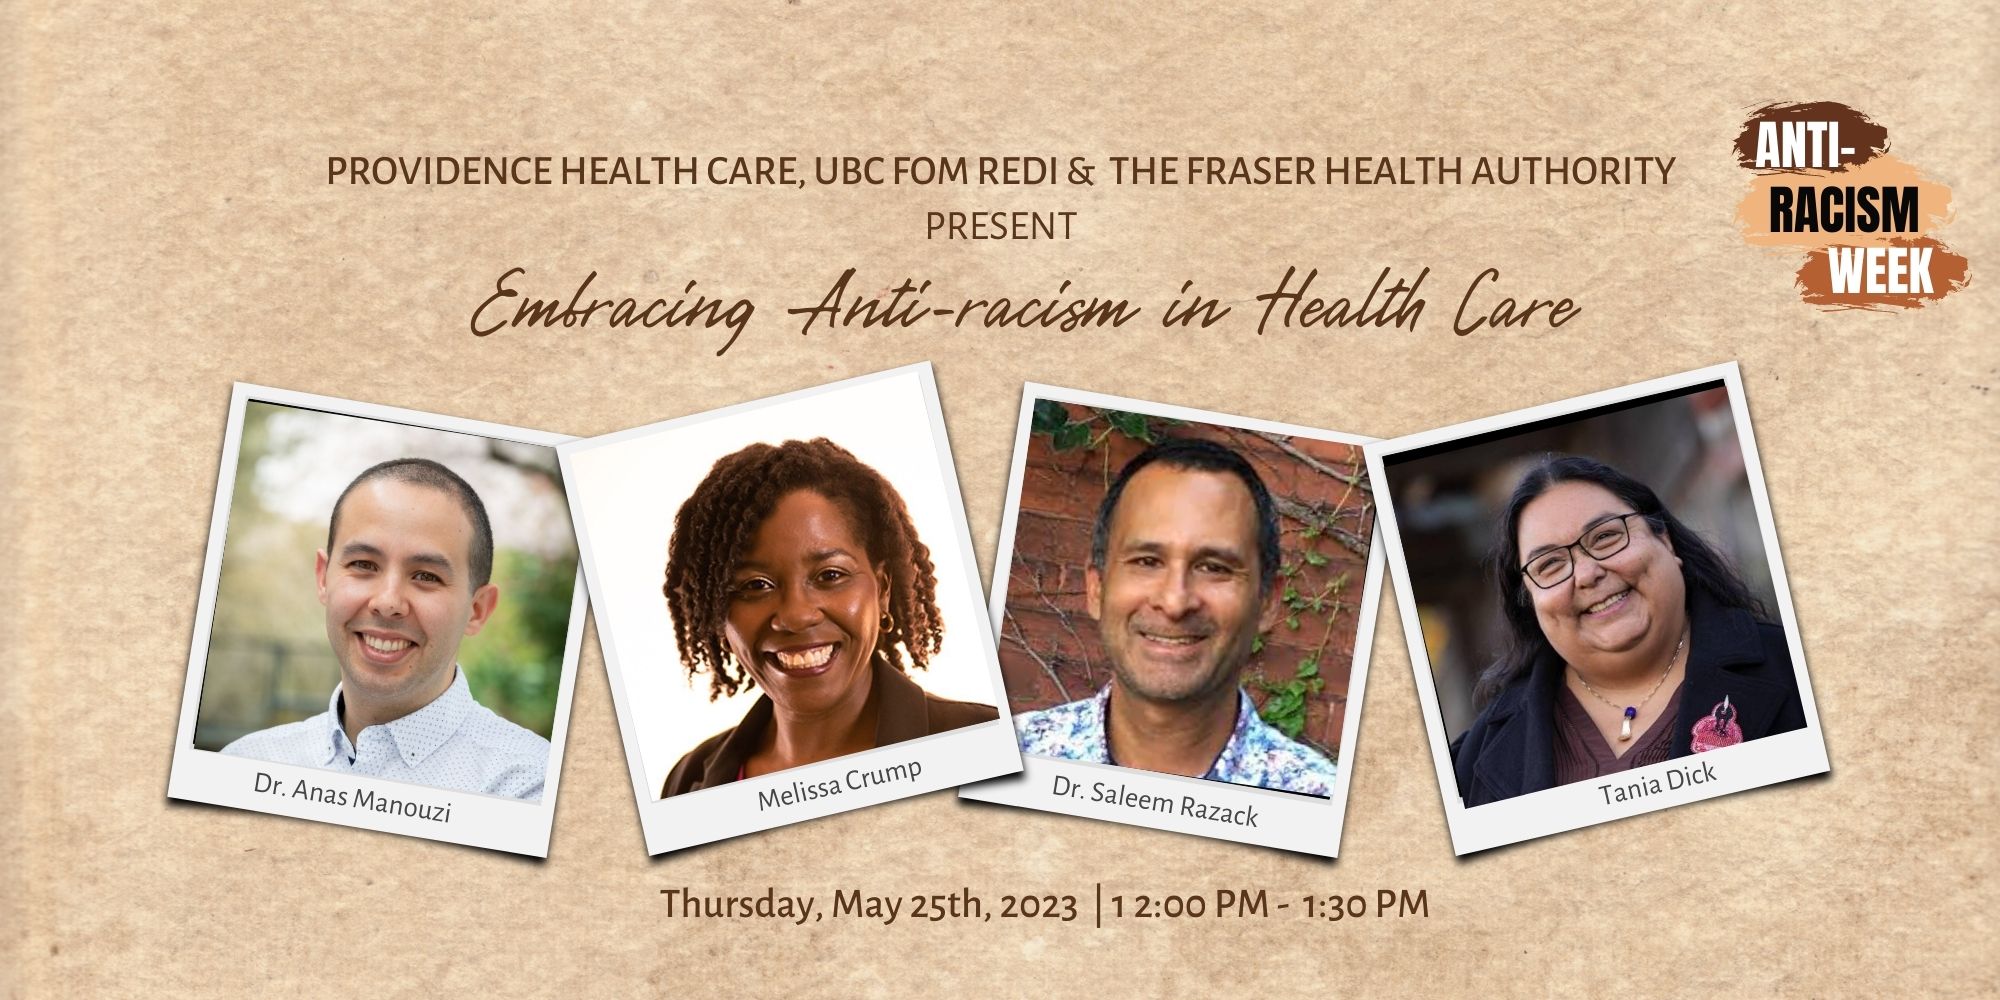 The Faculty of Medicine’s REDI Office presents: Embracing Anti-Racism in Health Care